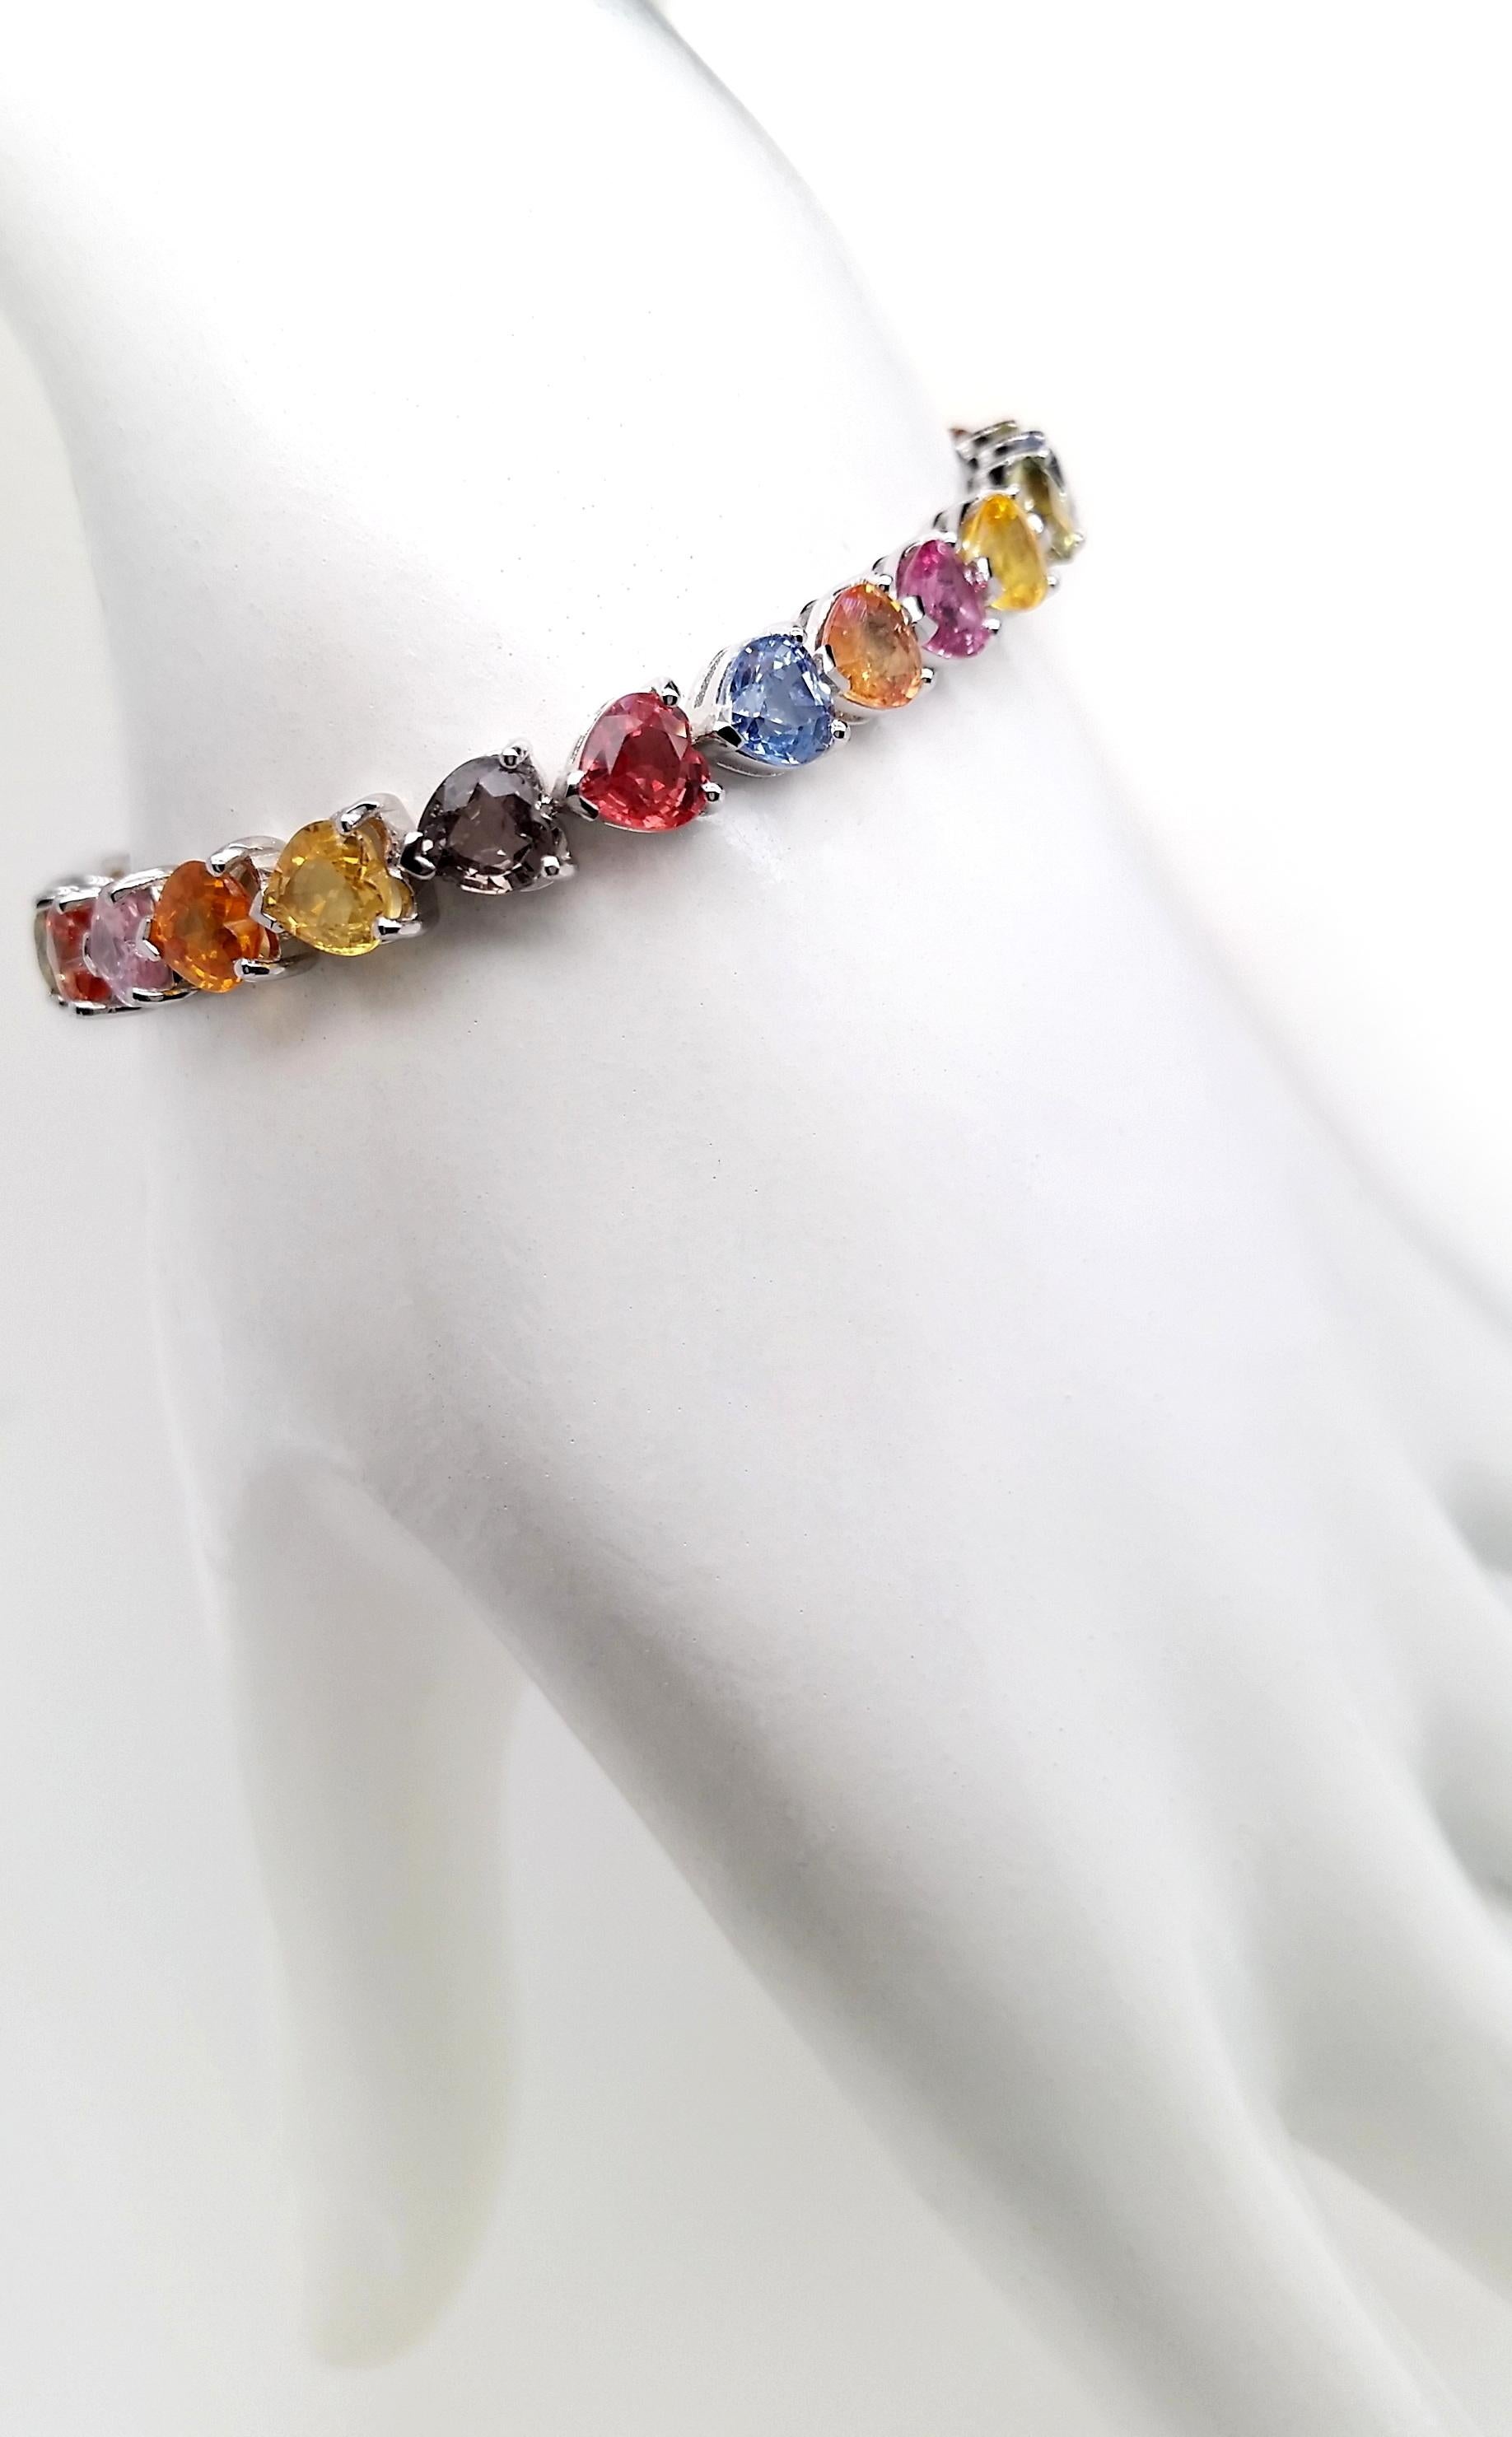 These splendid multi-color heart-shaped sapphires are set in 14K white gold bracelet, by Top Crown Jewelry House collection, to create the ultimate statement piece that everyone will remember.

This bracelet is certified by IGI laboratory, report